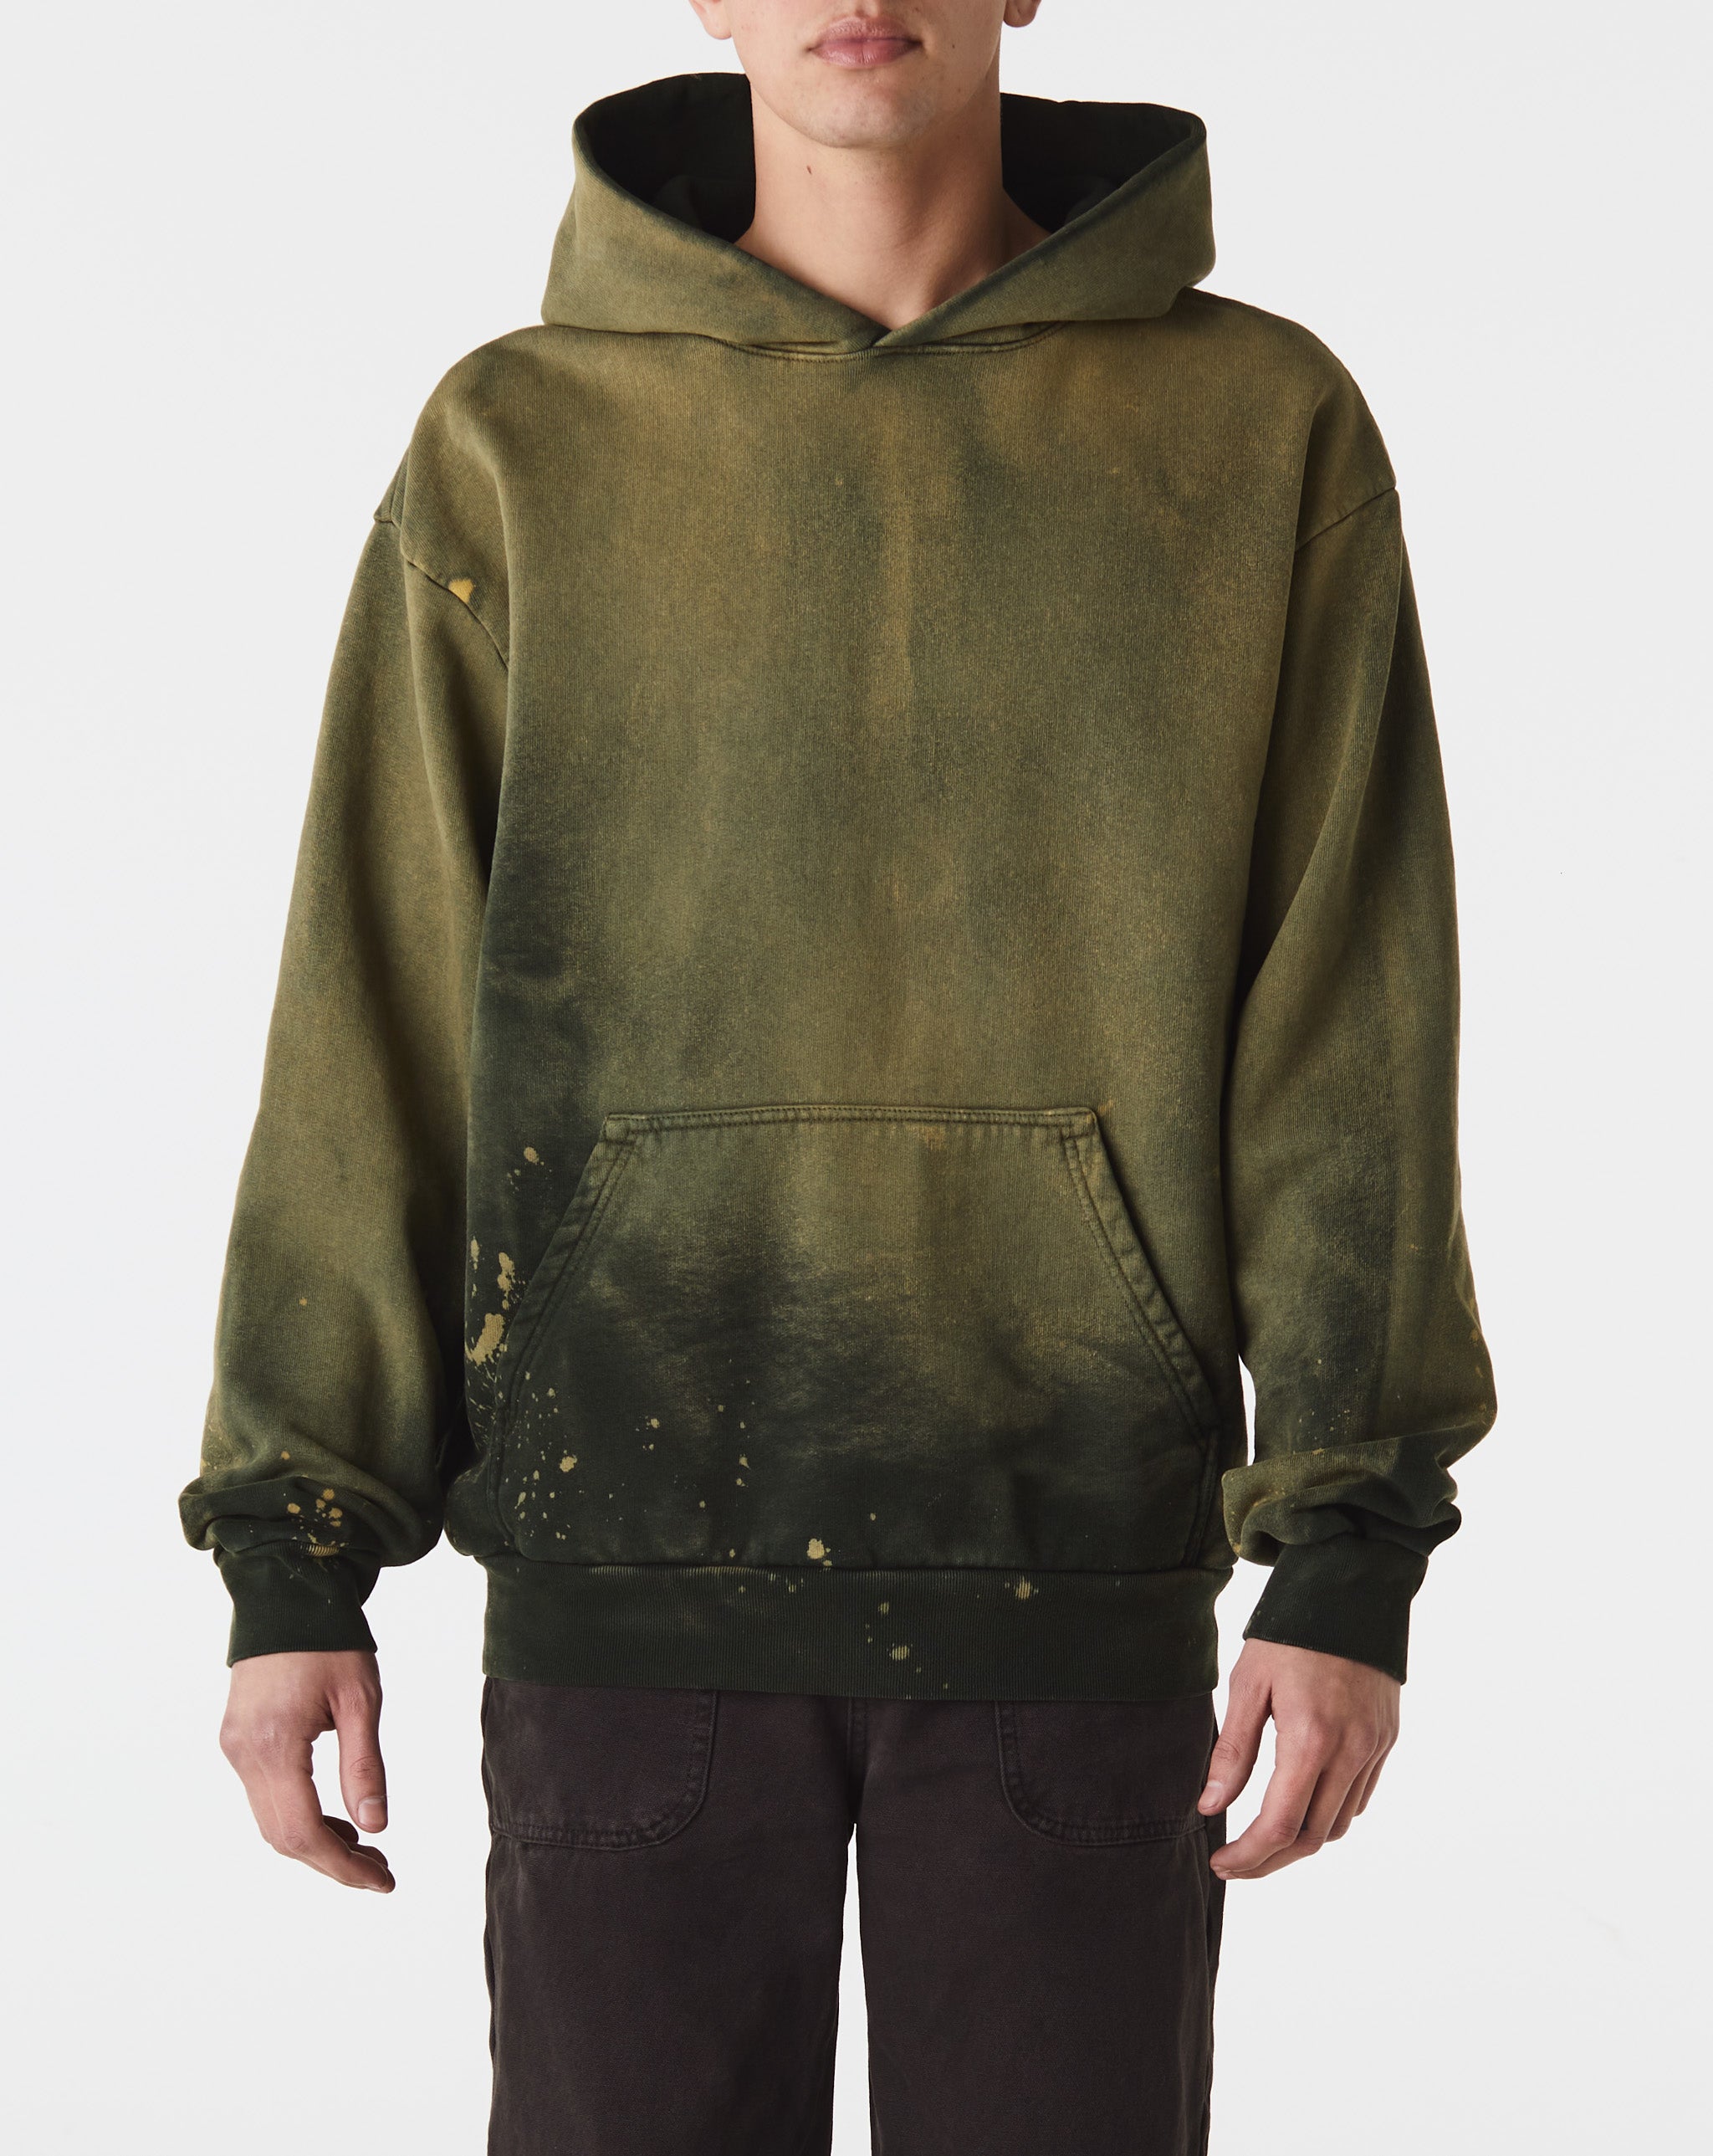 Basketcase Gallery Blanch Sunfaded Hoodie  - XHIBITION